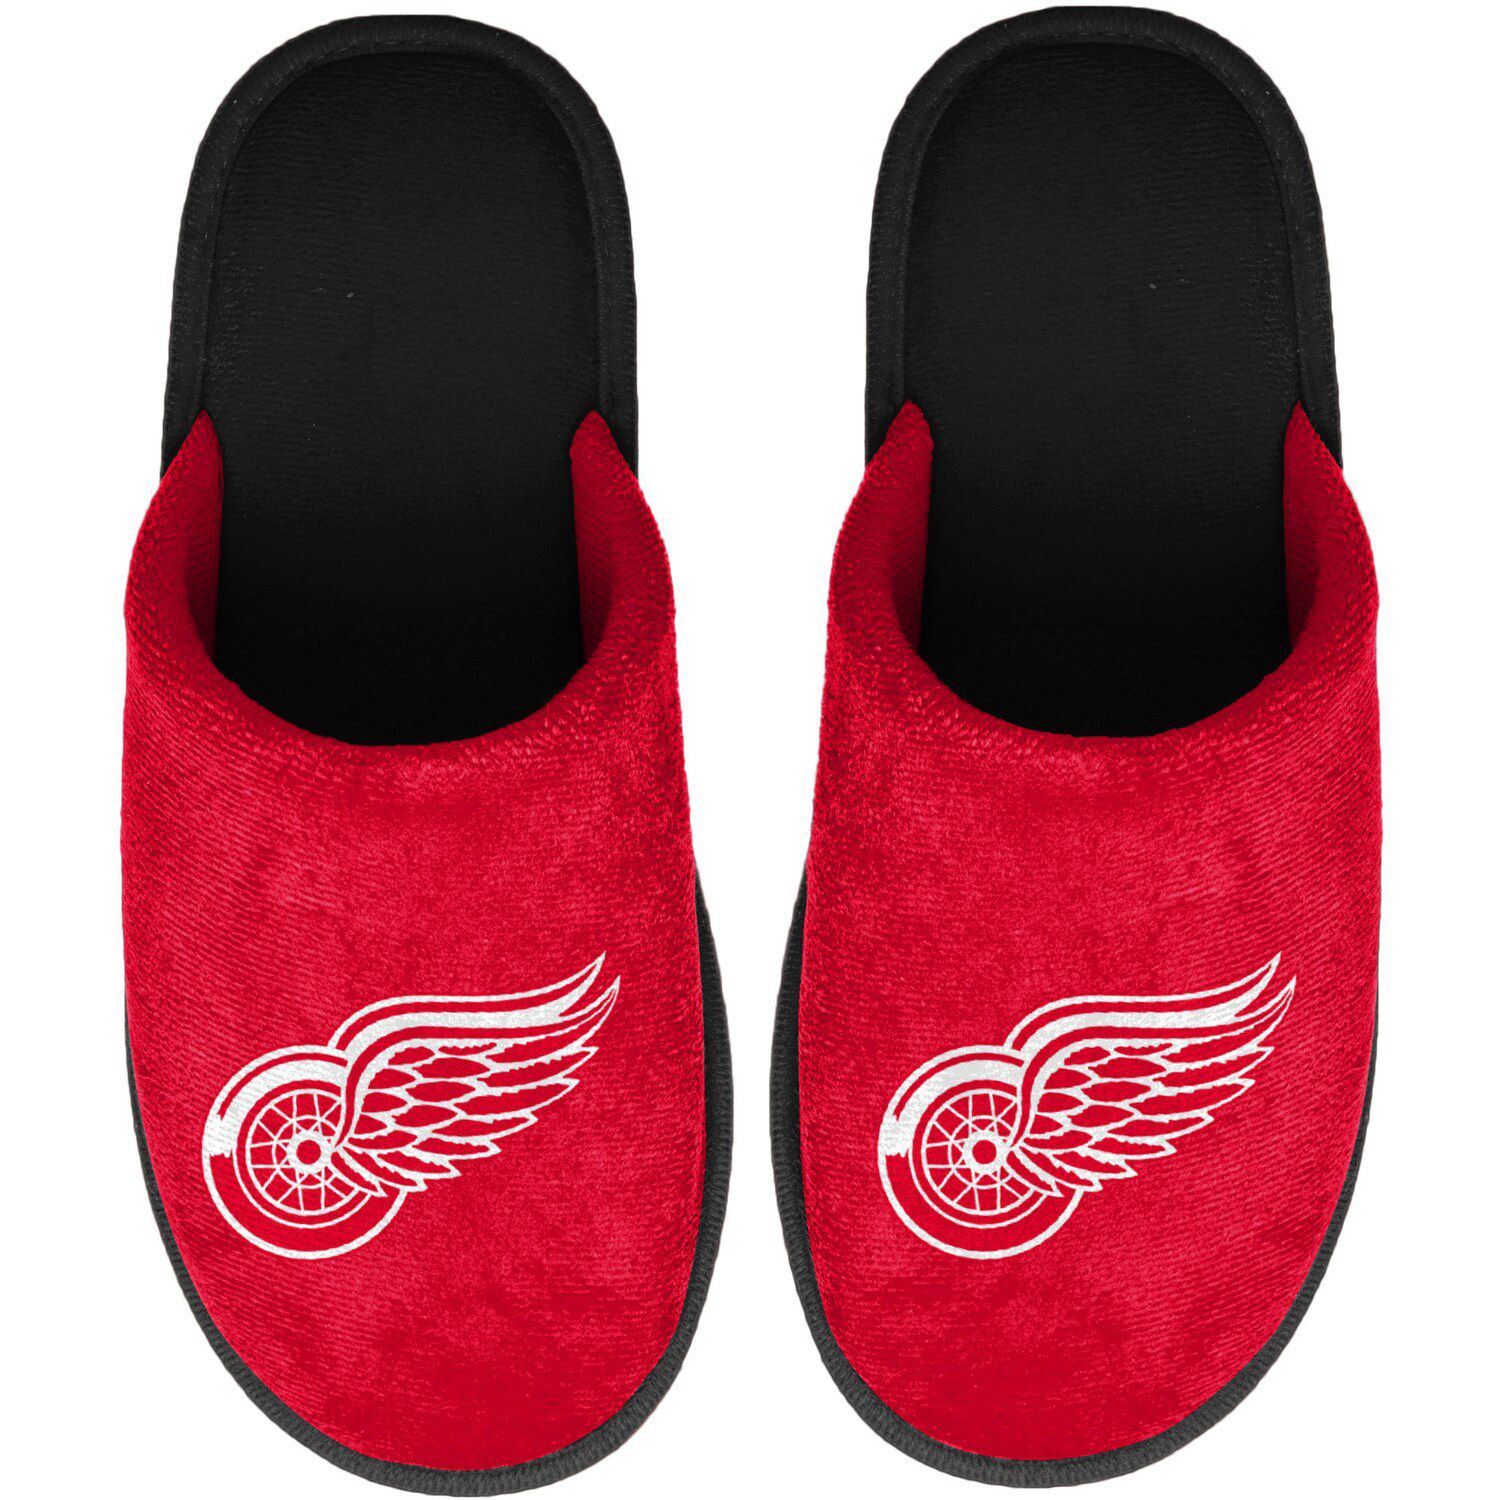 red wing slippers mens